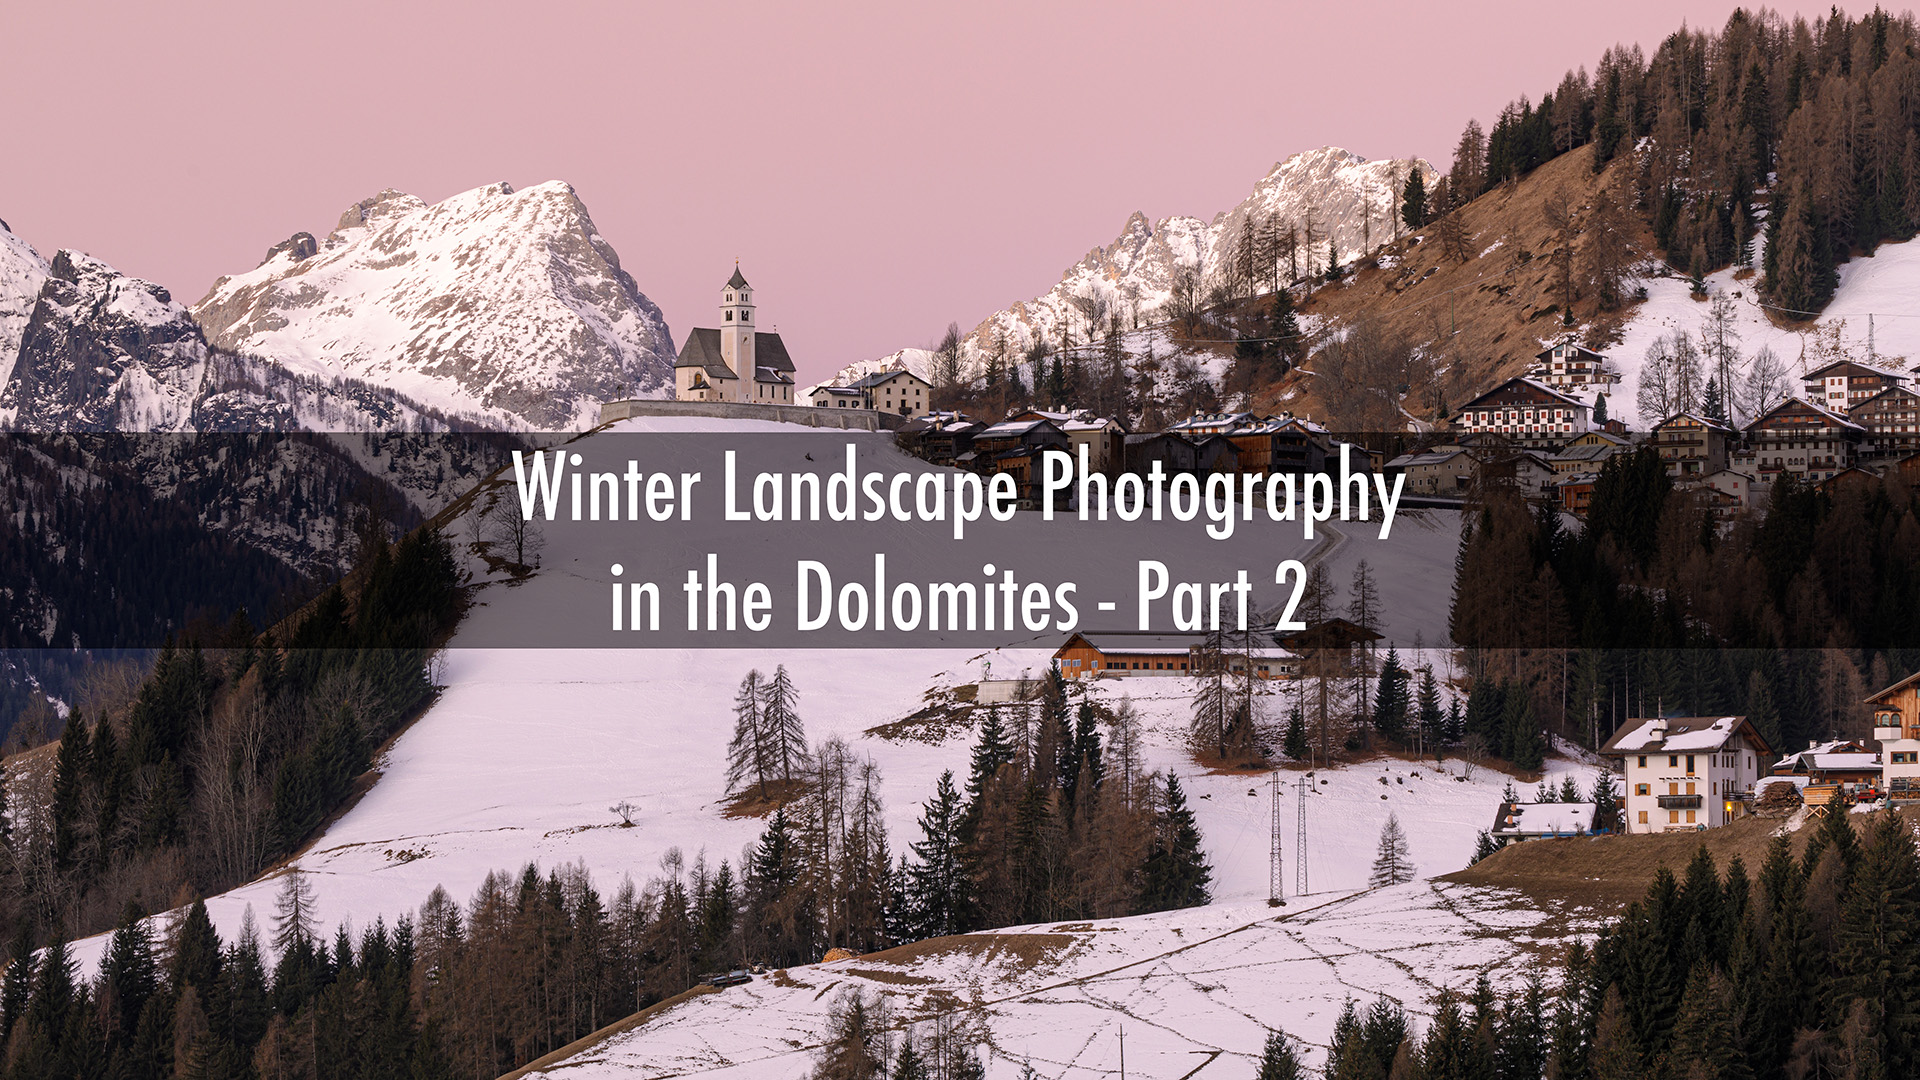 Winter landscape photography in the Dolomites. Part 2. Italy.